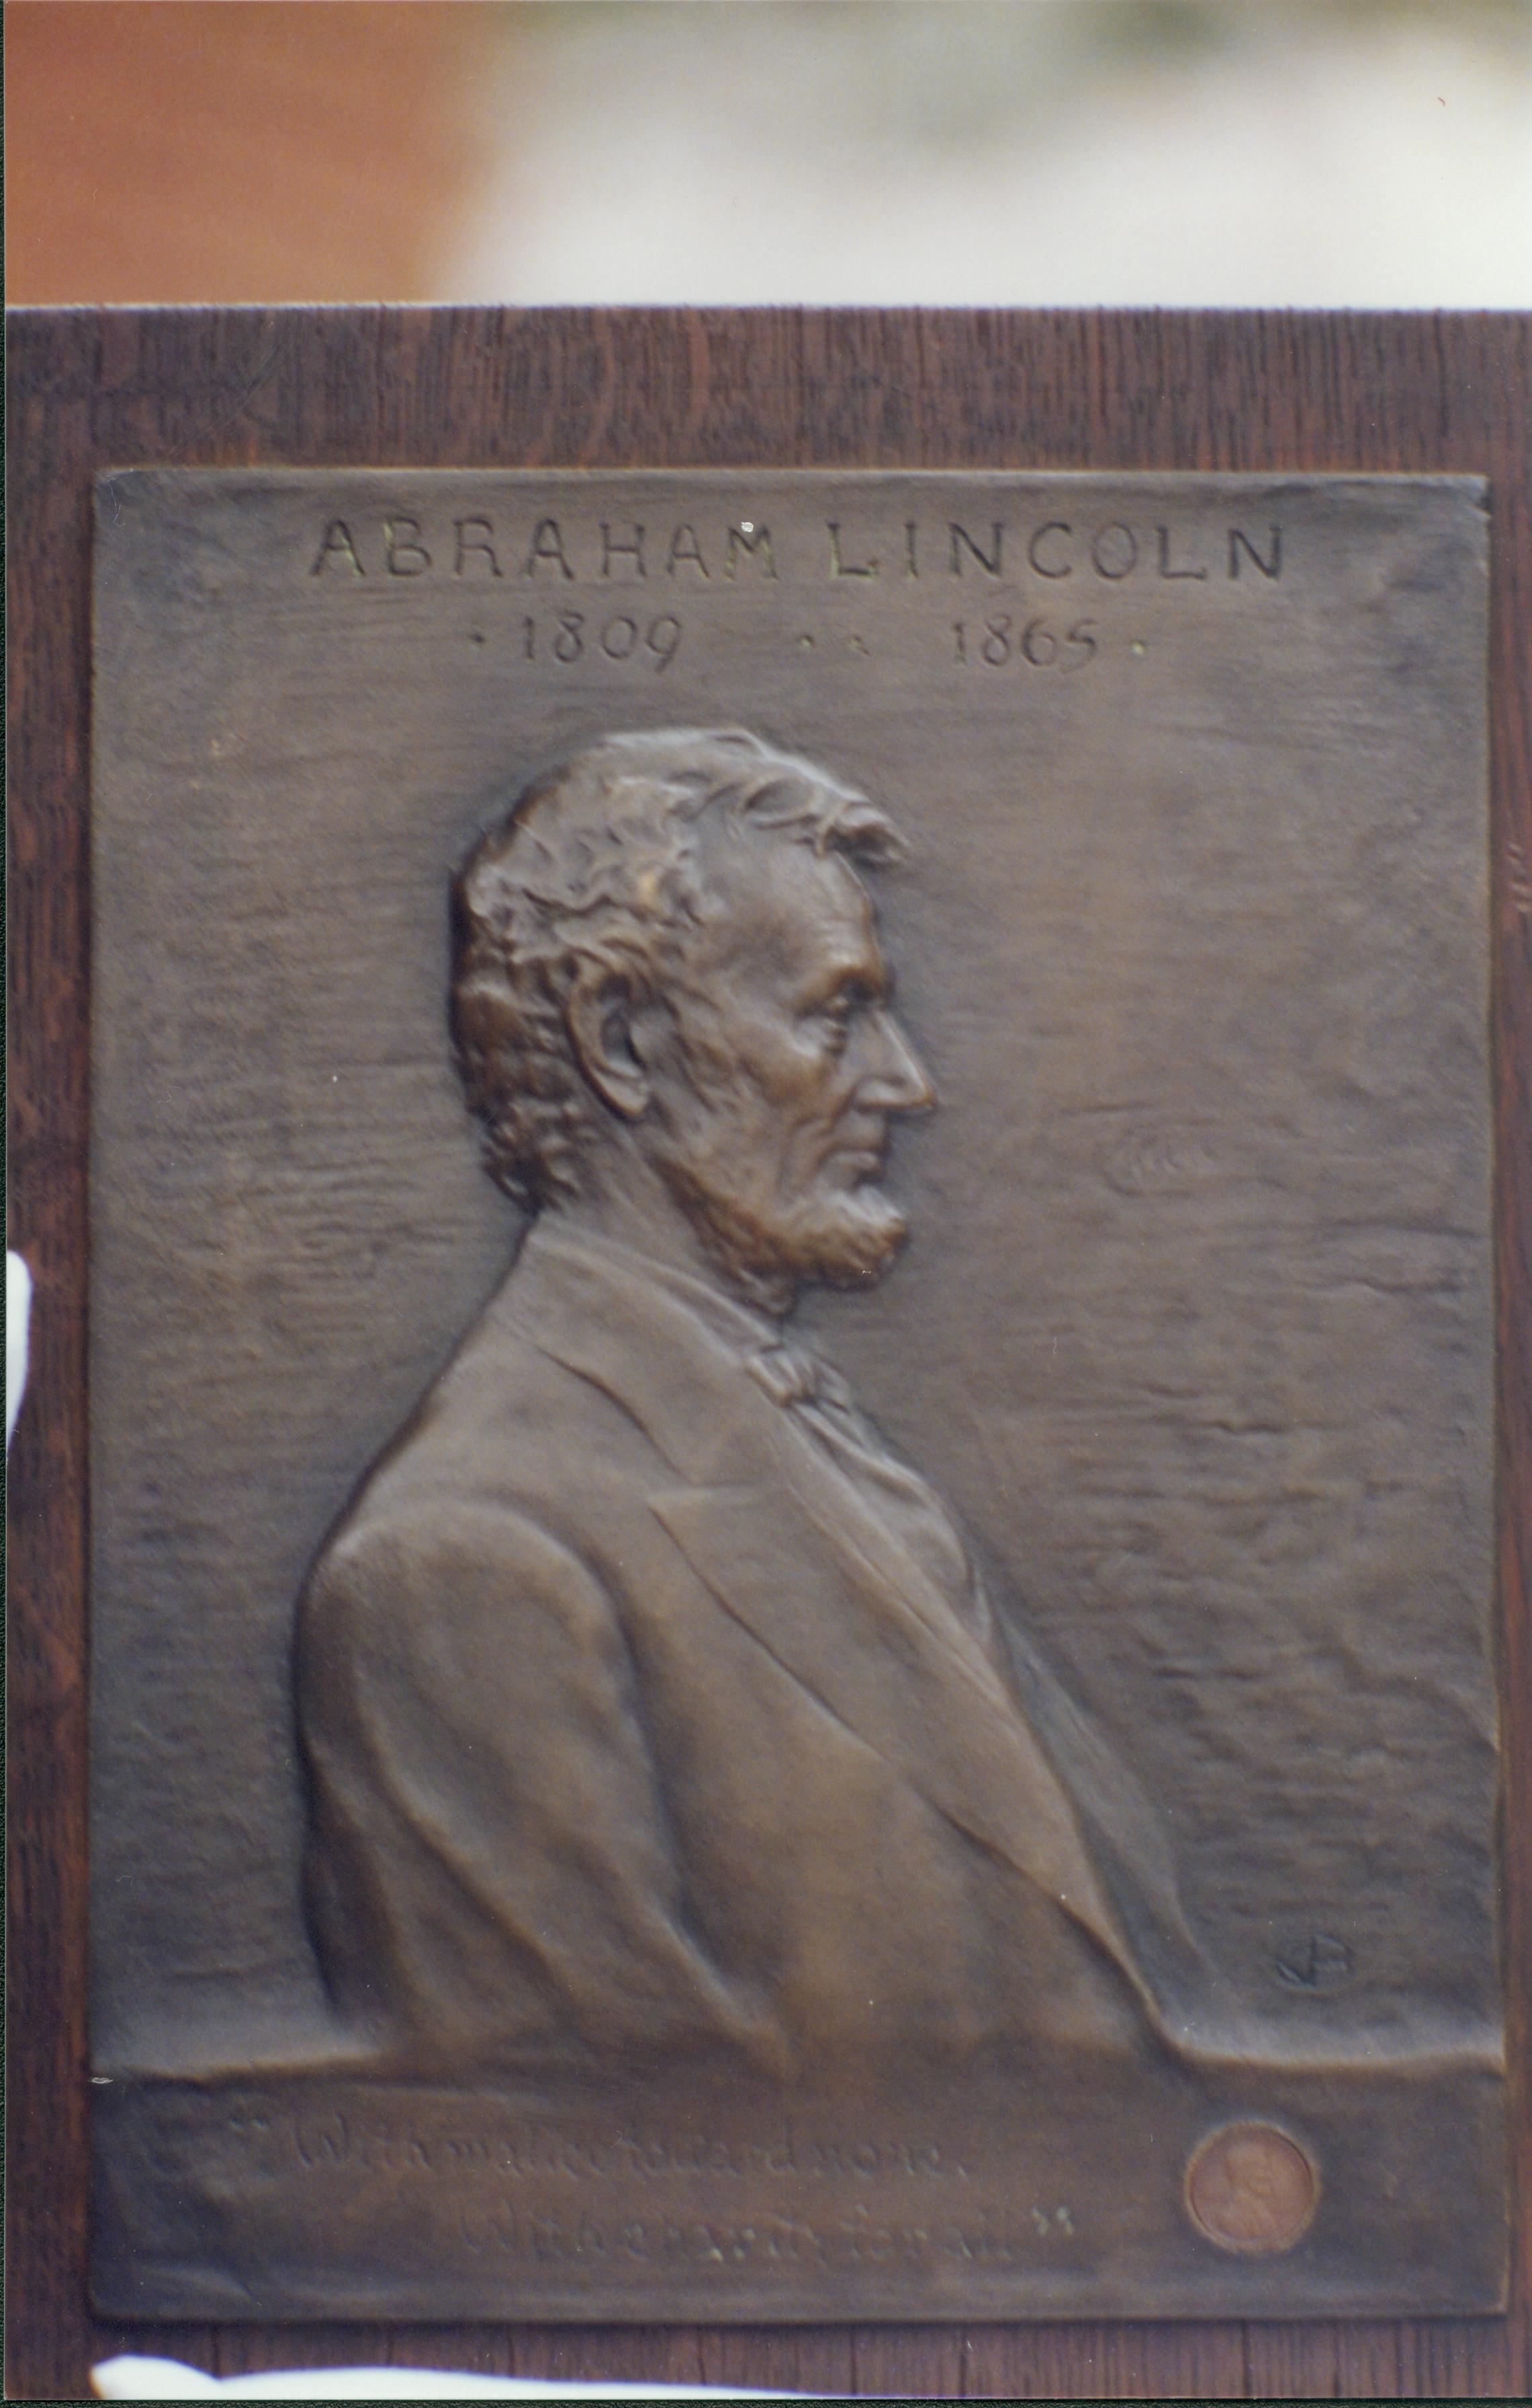 bronze placque of Abraham Lincoln Lincoln Home NHS, Nation Mourns, 2211 exhibit, placque